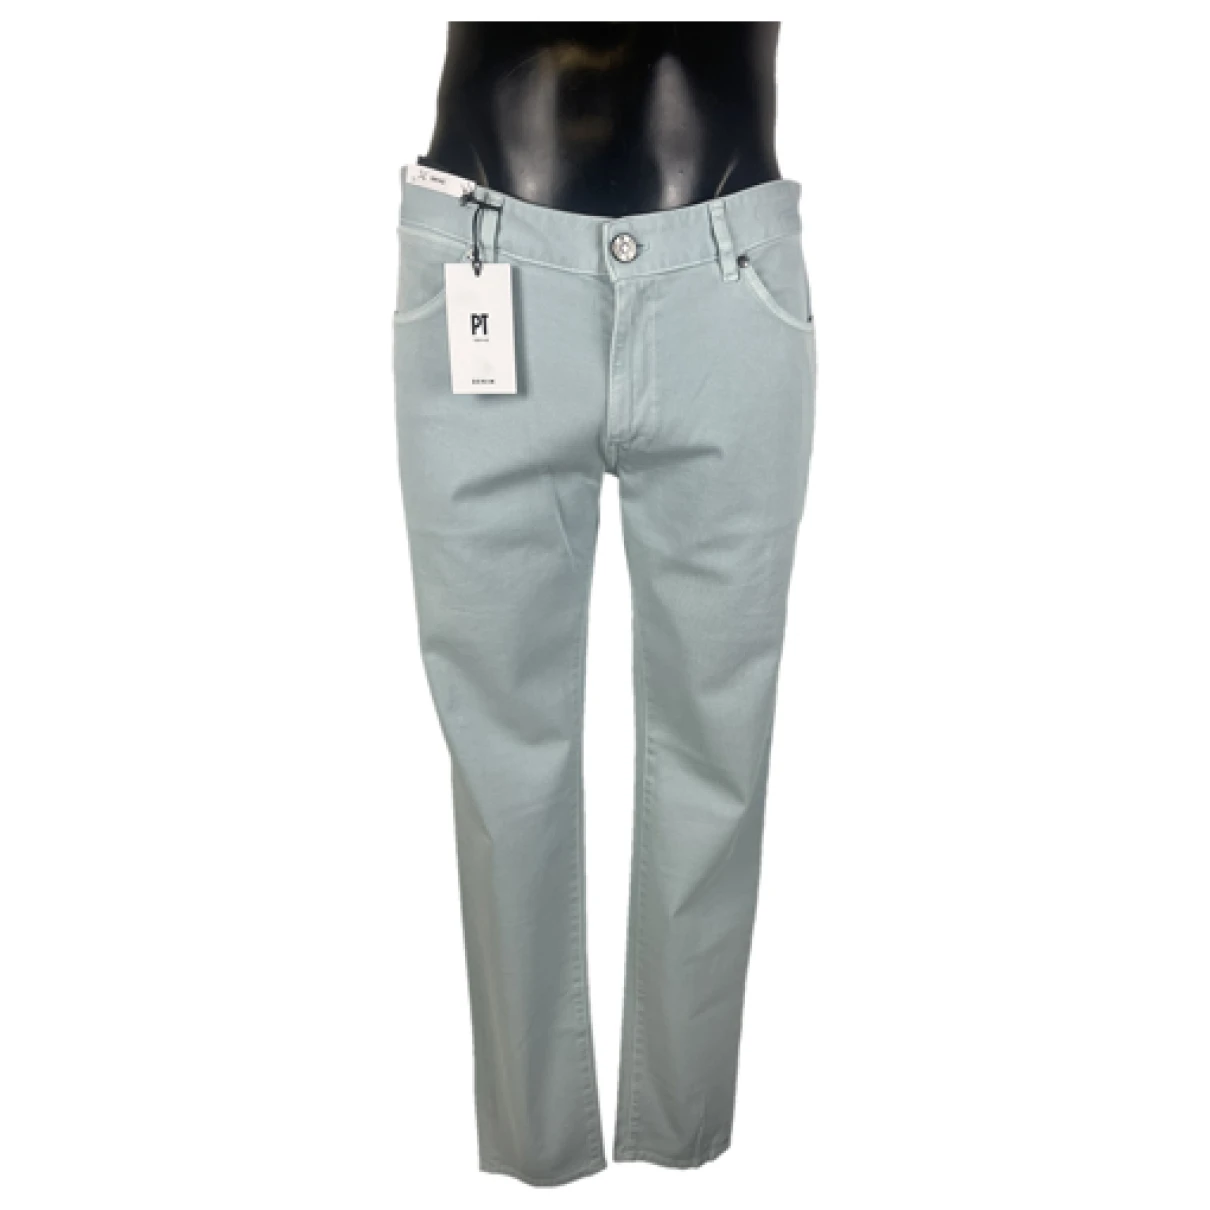 Pre-owned Pt01 Trousers In Turquoise